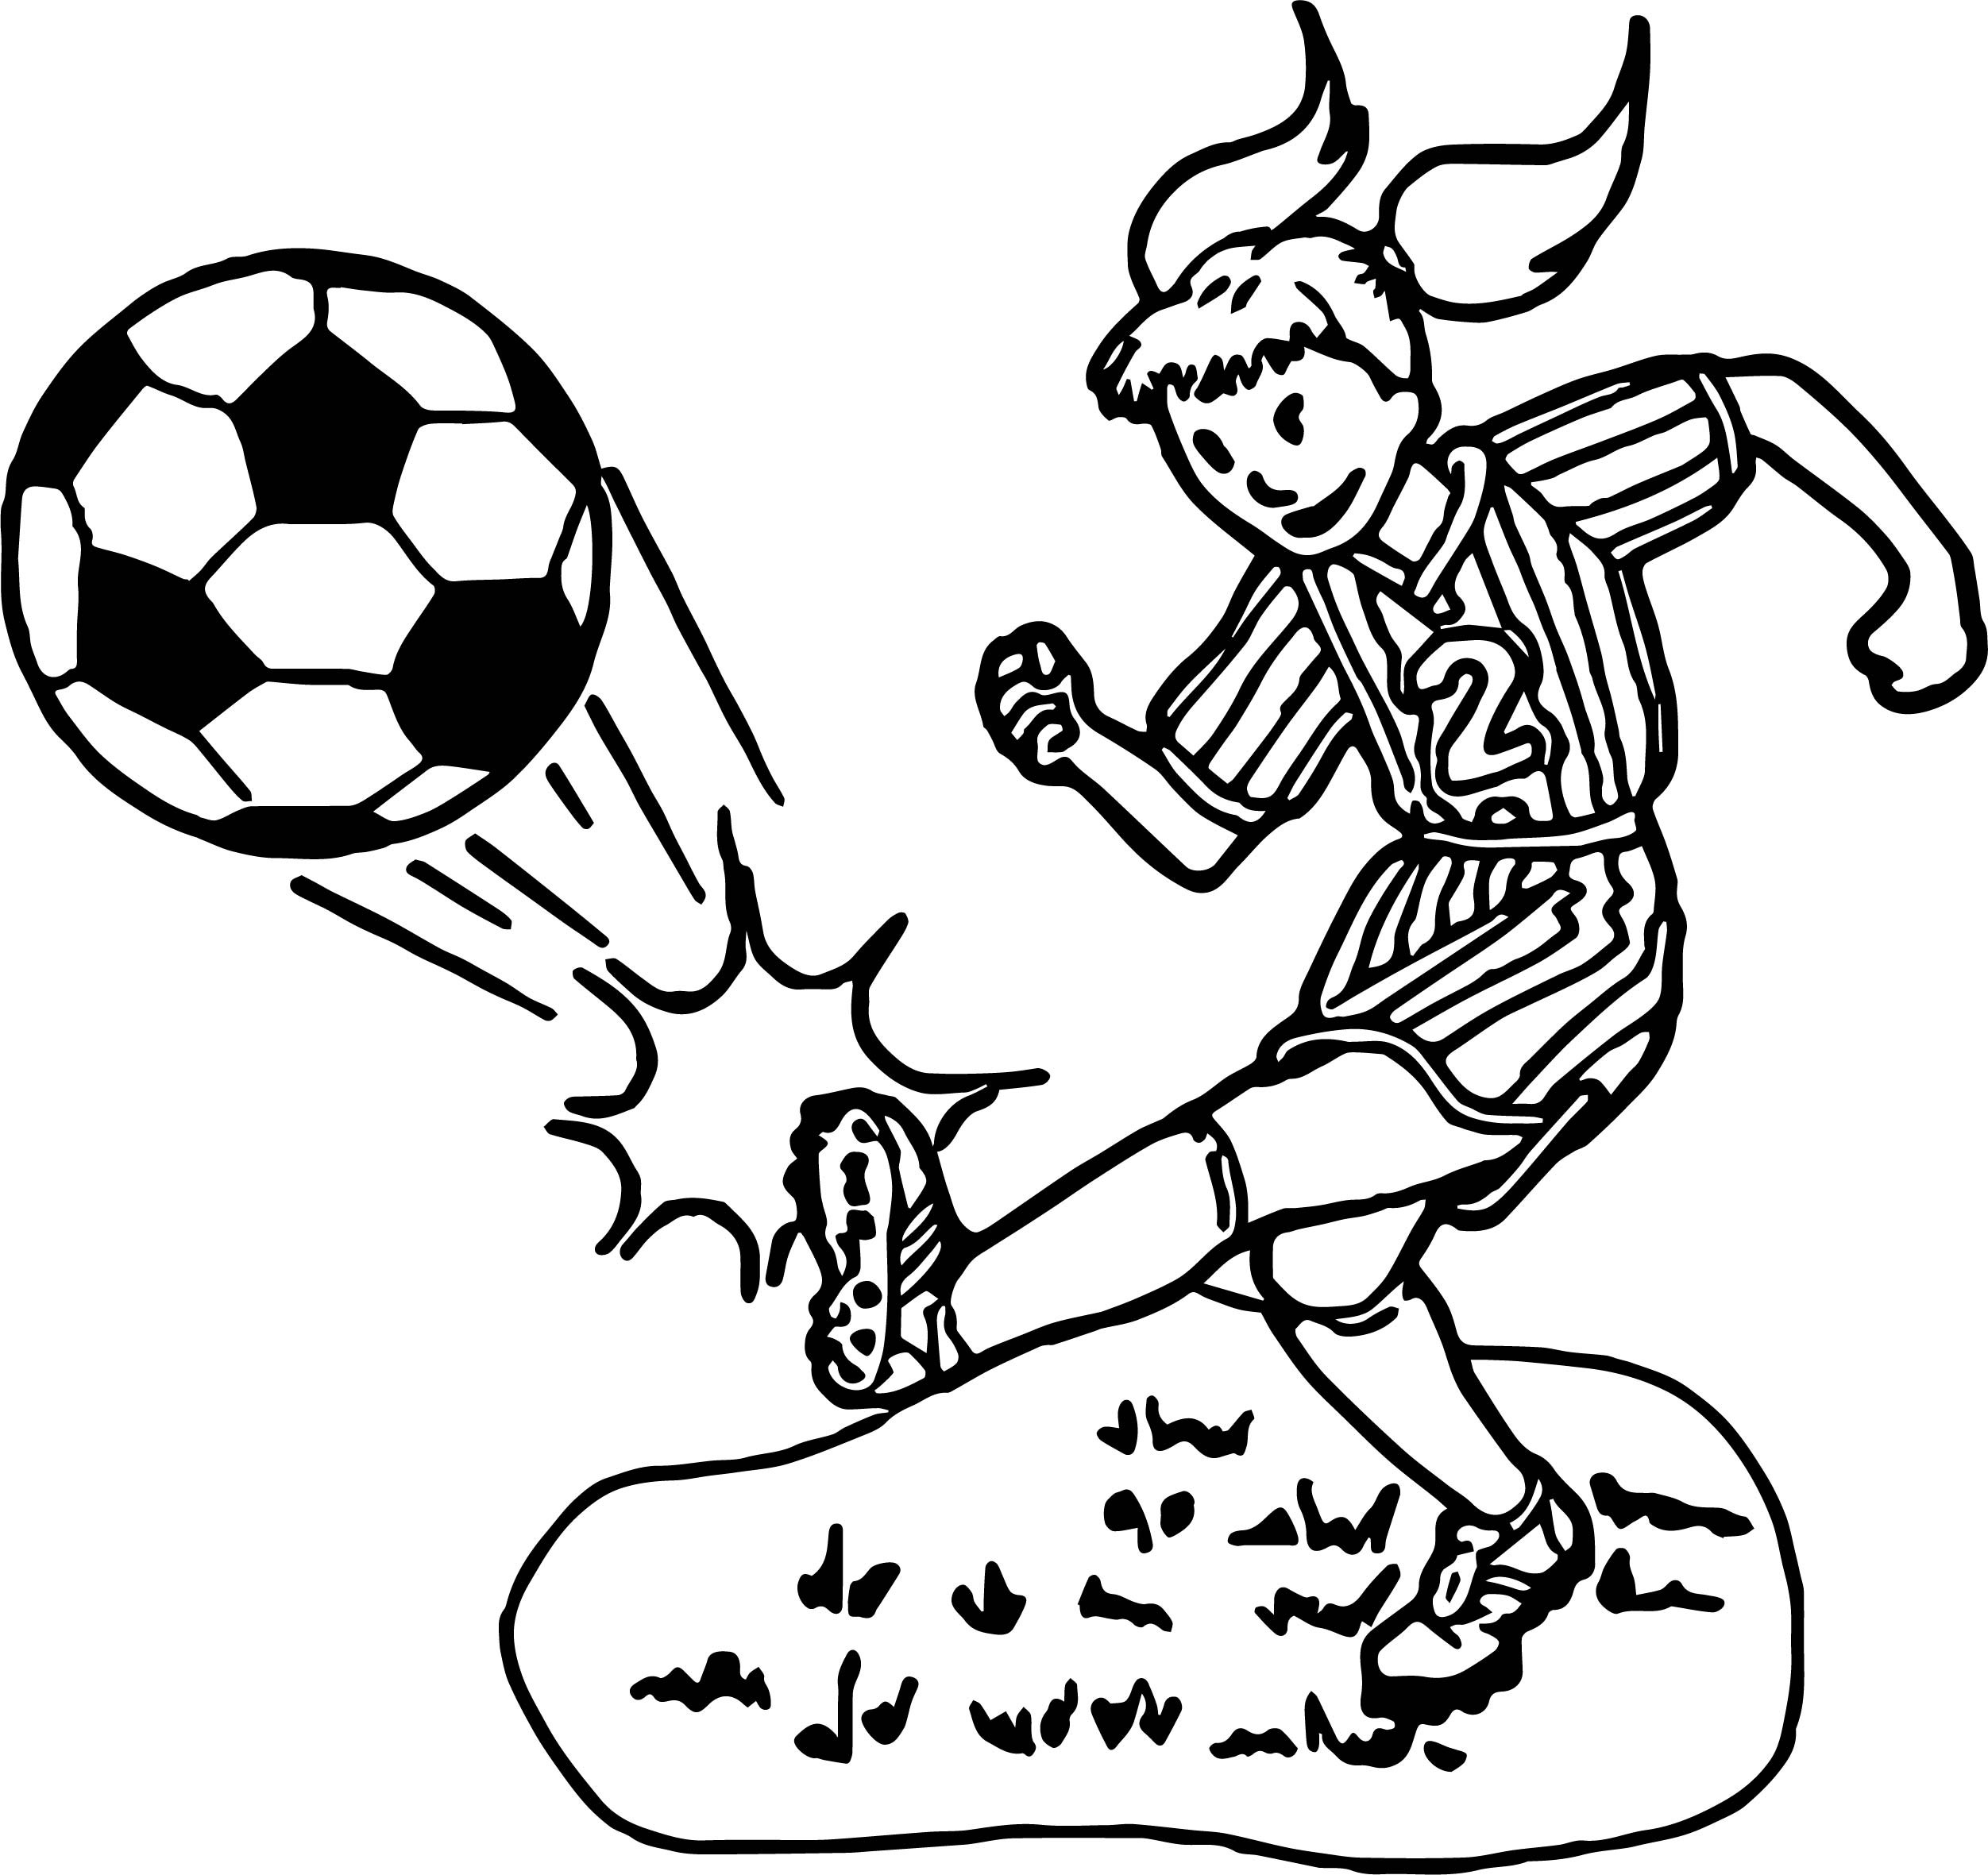 Girls Soccer Coloring Pages
 Kid Girl Playing Soccer Playing Football Coloring Page